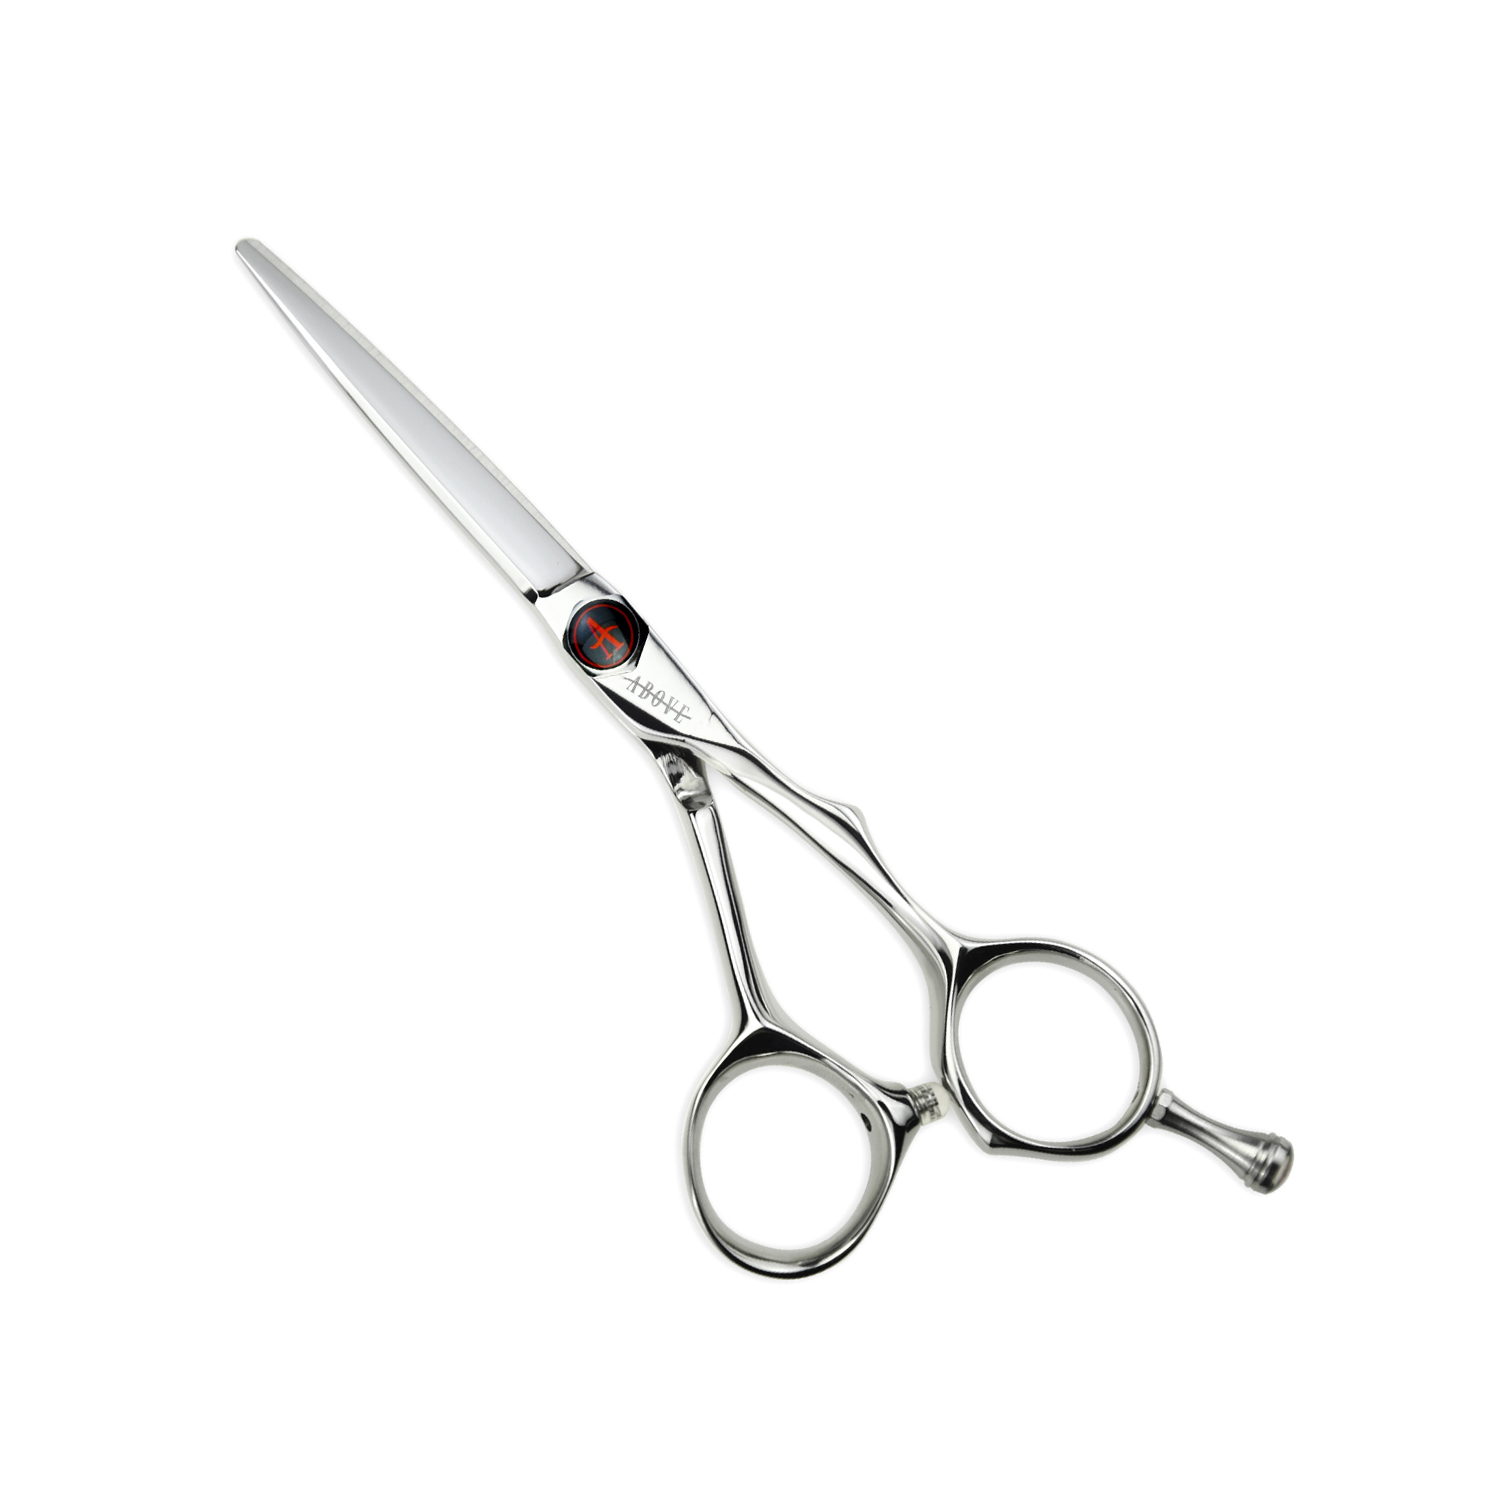 Above Finesse X Hair Cutting Shears - 5.5